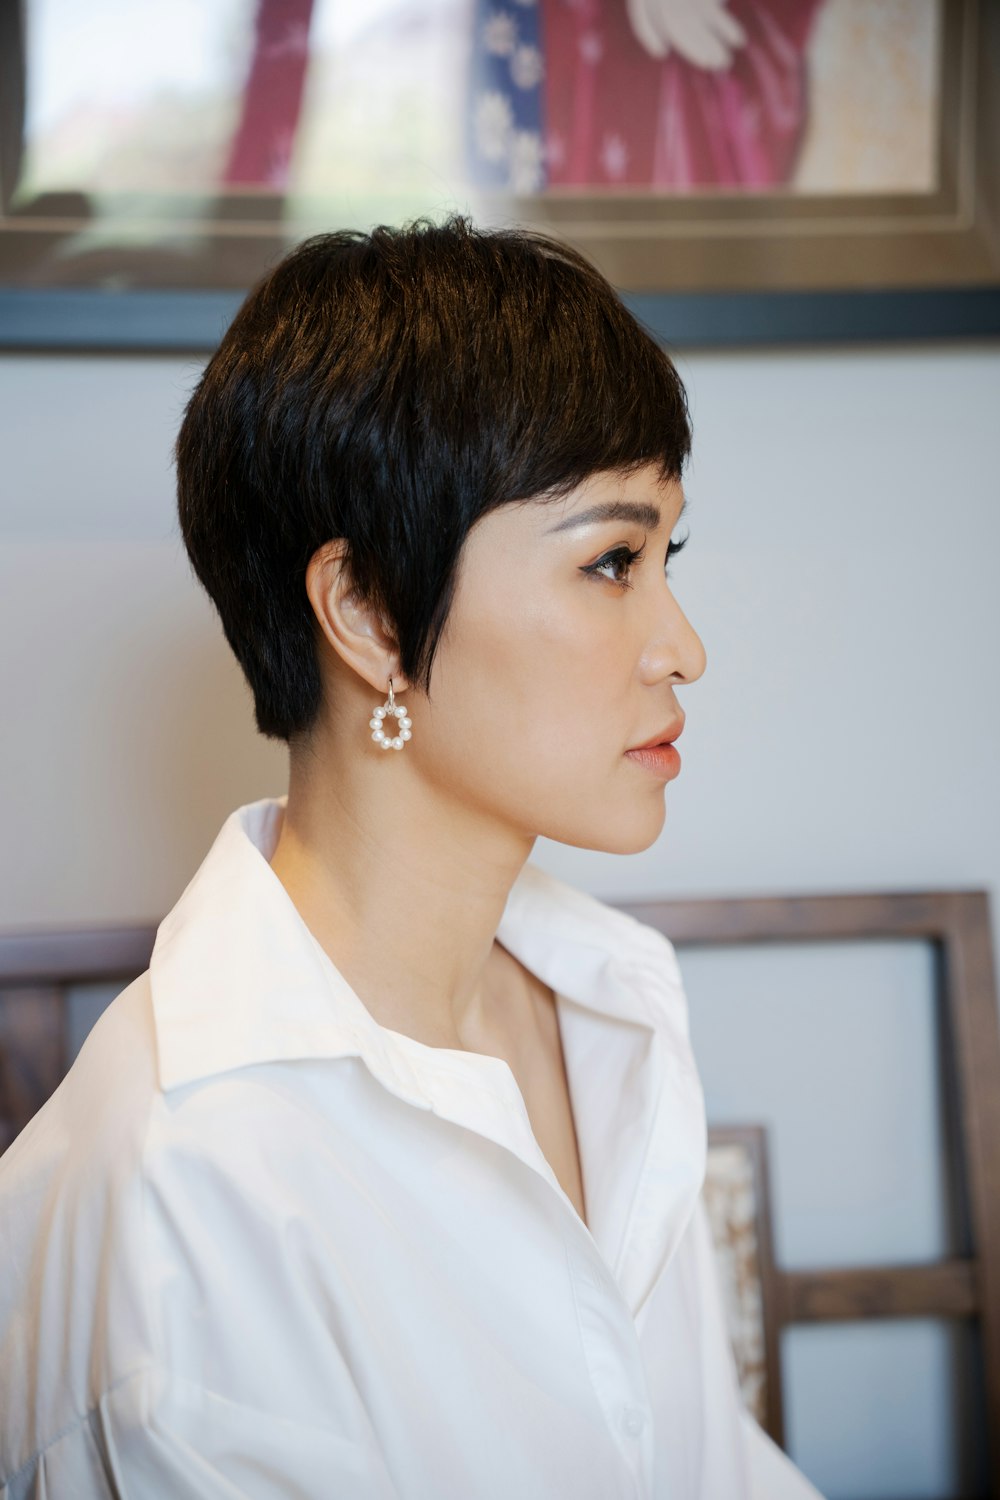 a woman with short hair wearing a white shirt